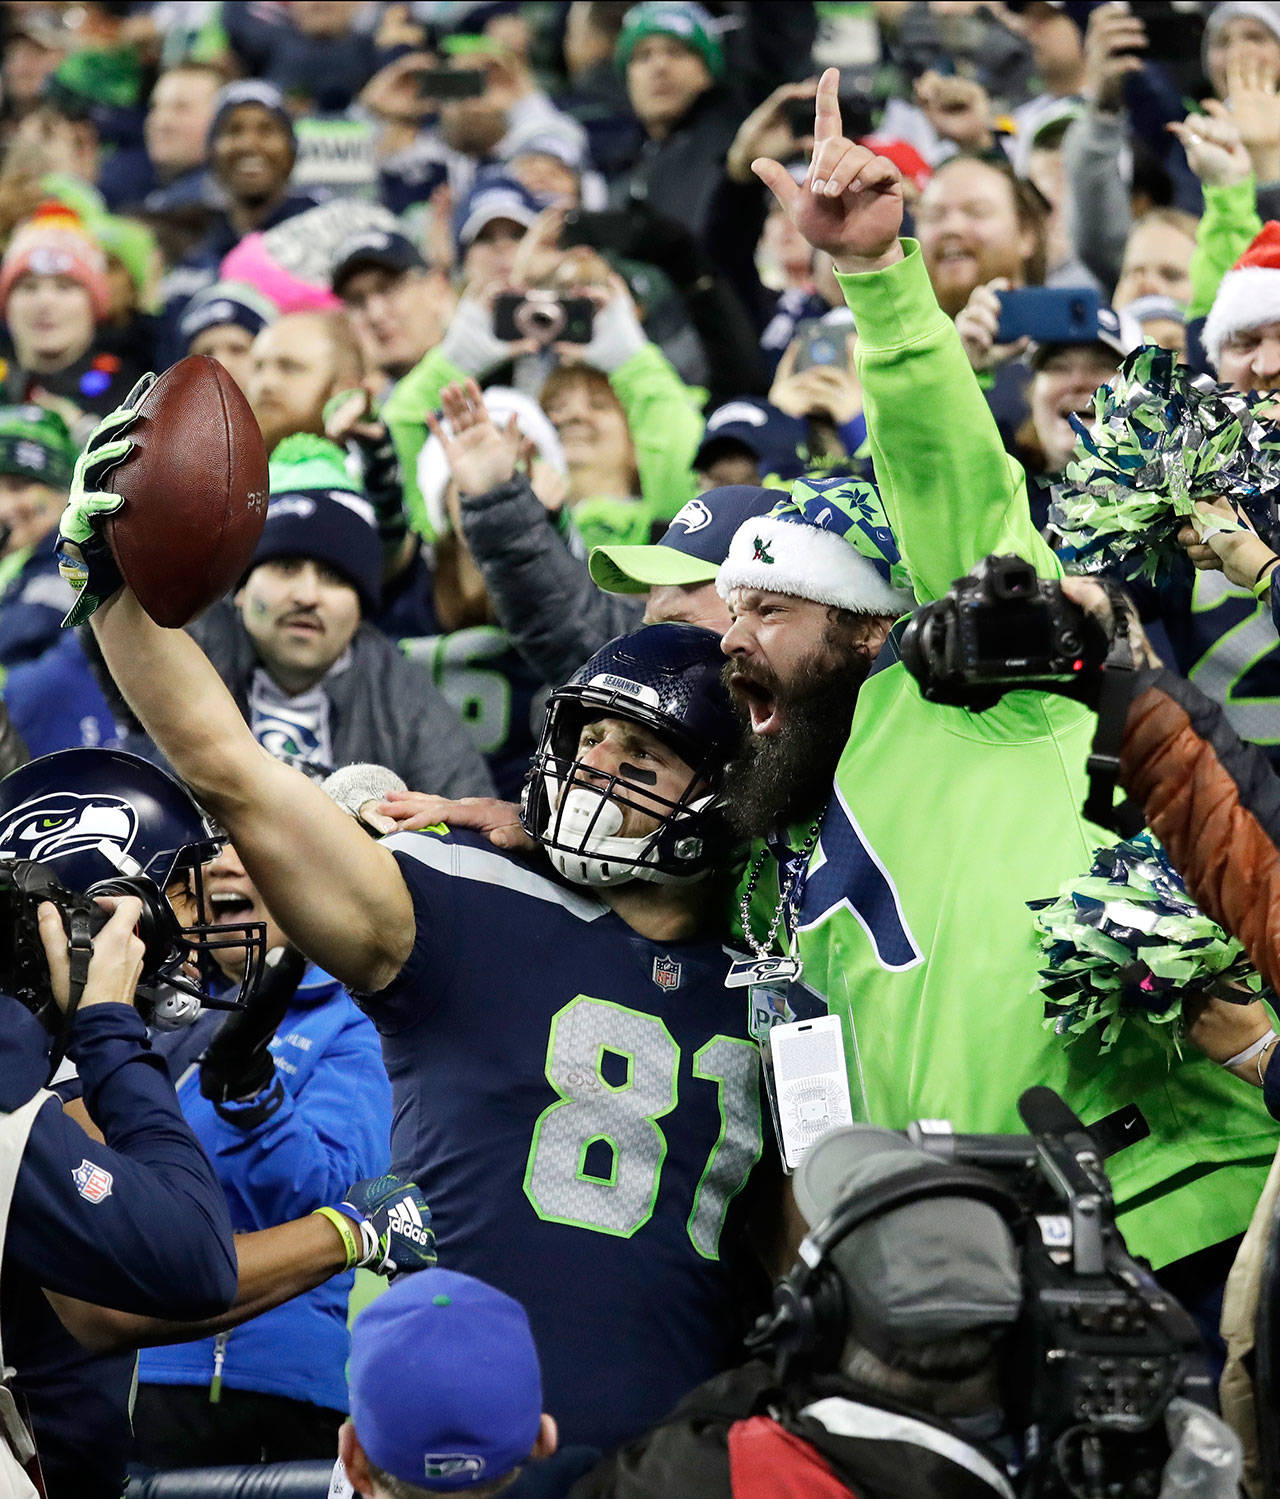 Seattle Seahawks tight end Nick Vannett (81) celebrates with a fan after he scored a touchdown against the Kansas City Chiefs during a game on Dec. 23, 2018, in Seattle. (AP Photo/Elaine Thompson)